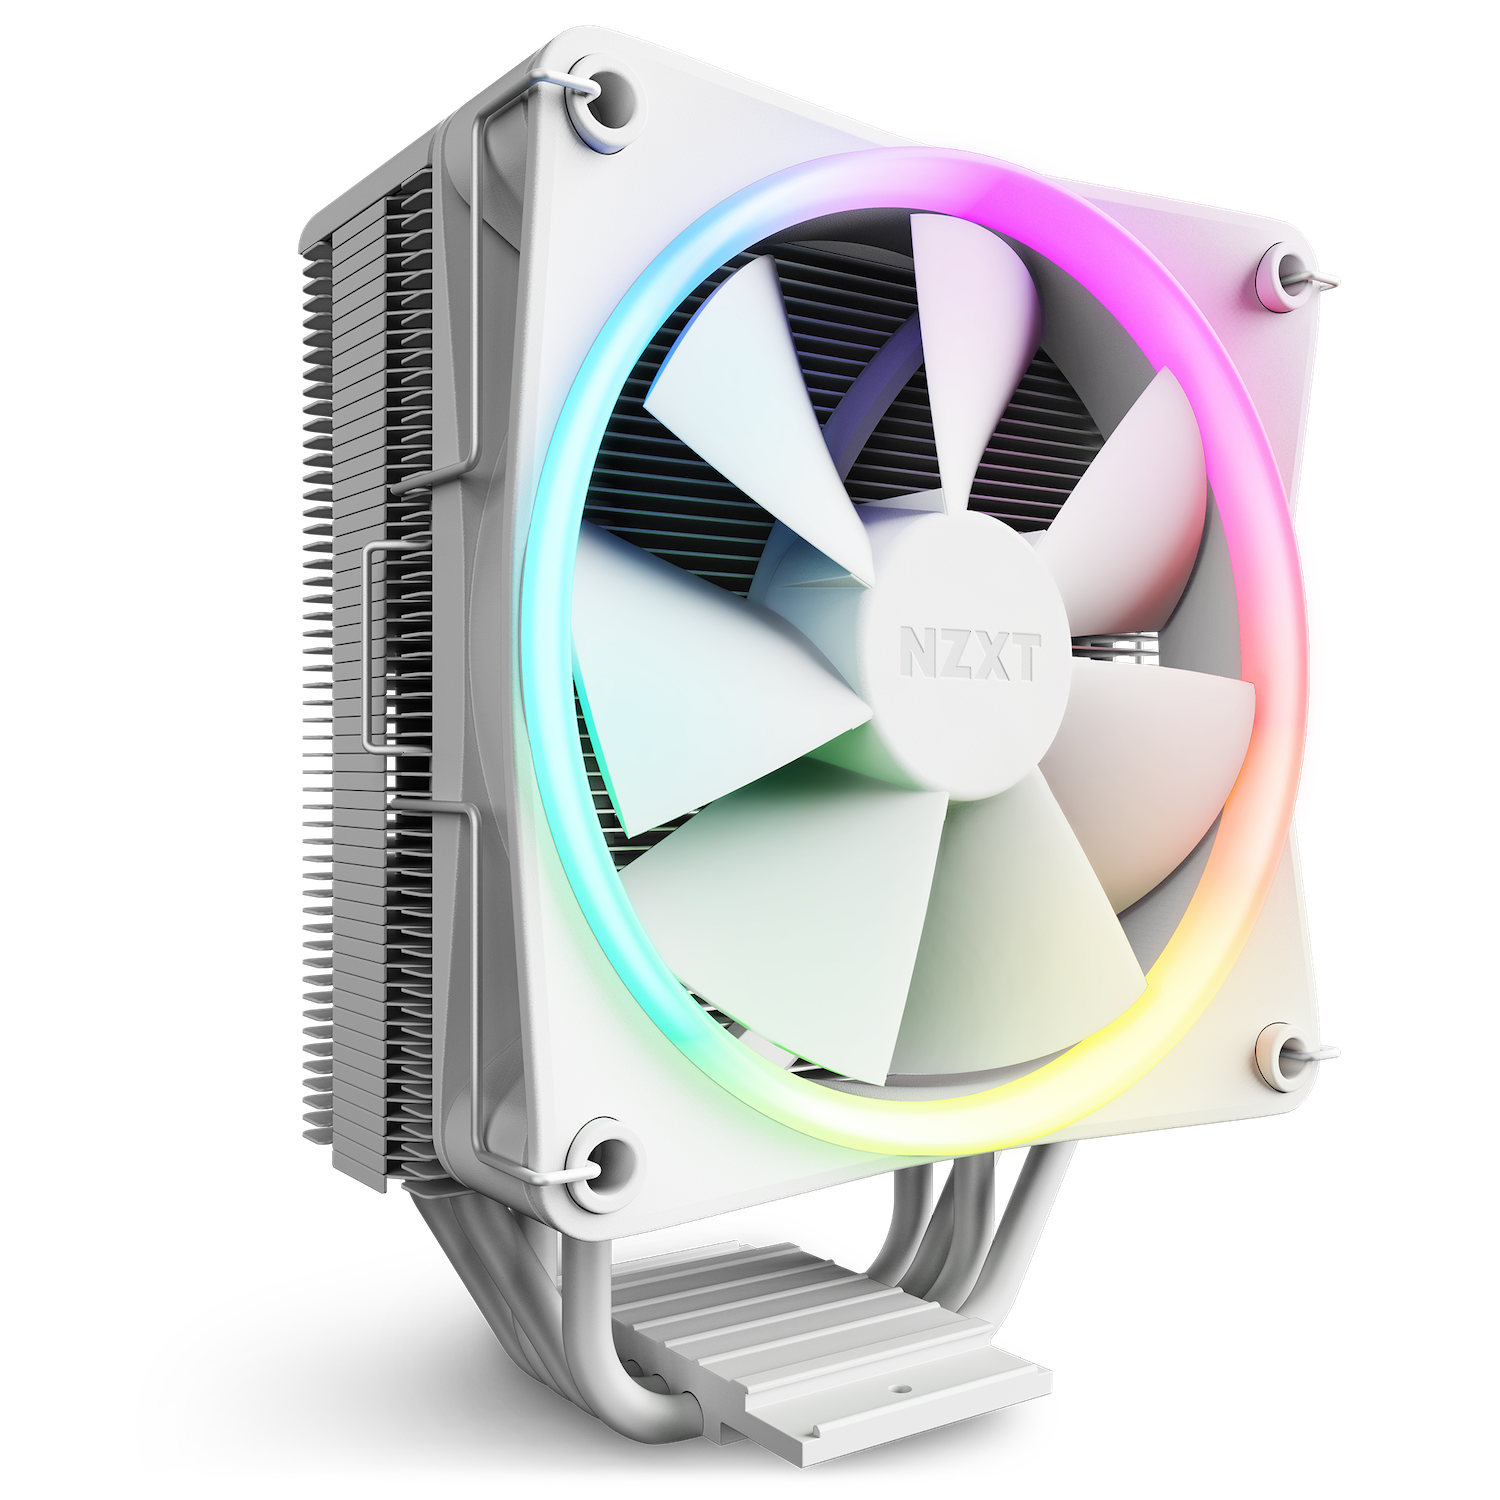 NZXT T120 RGB | 120mm Air Cooler (White)